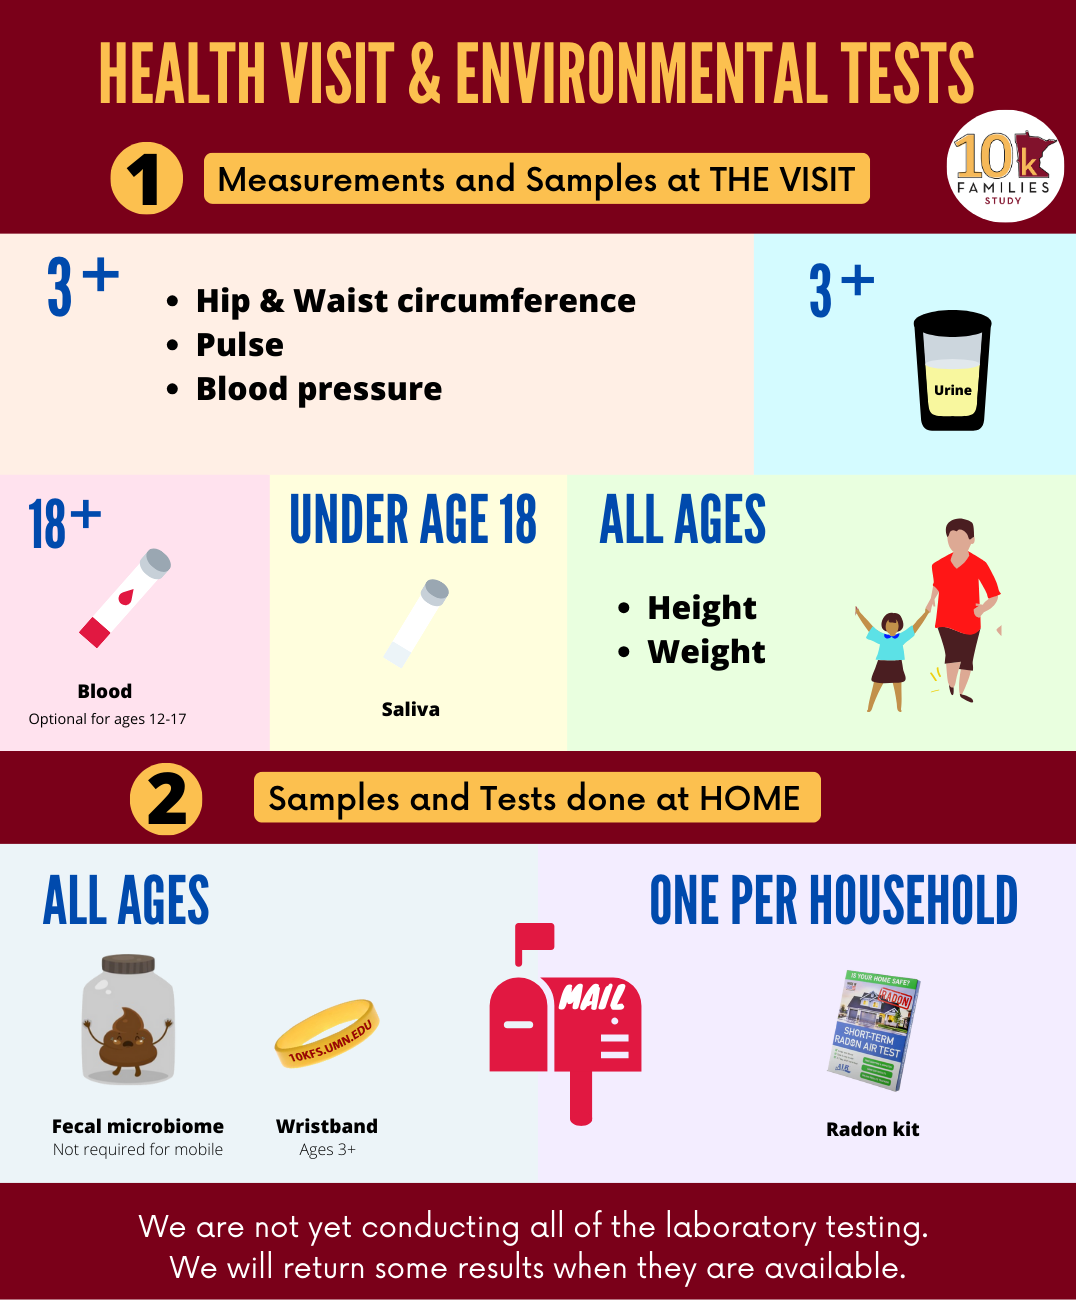 Infographic maroon background, two sections: measurement and samples at visti, samples and tests at home